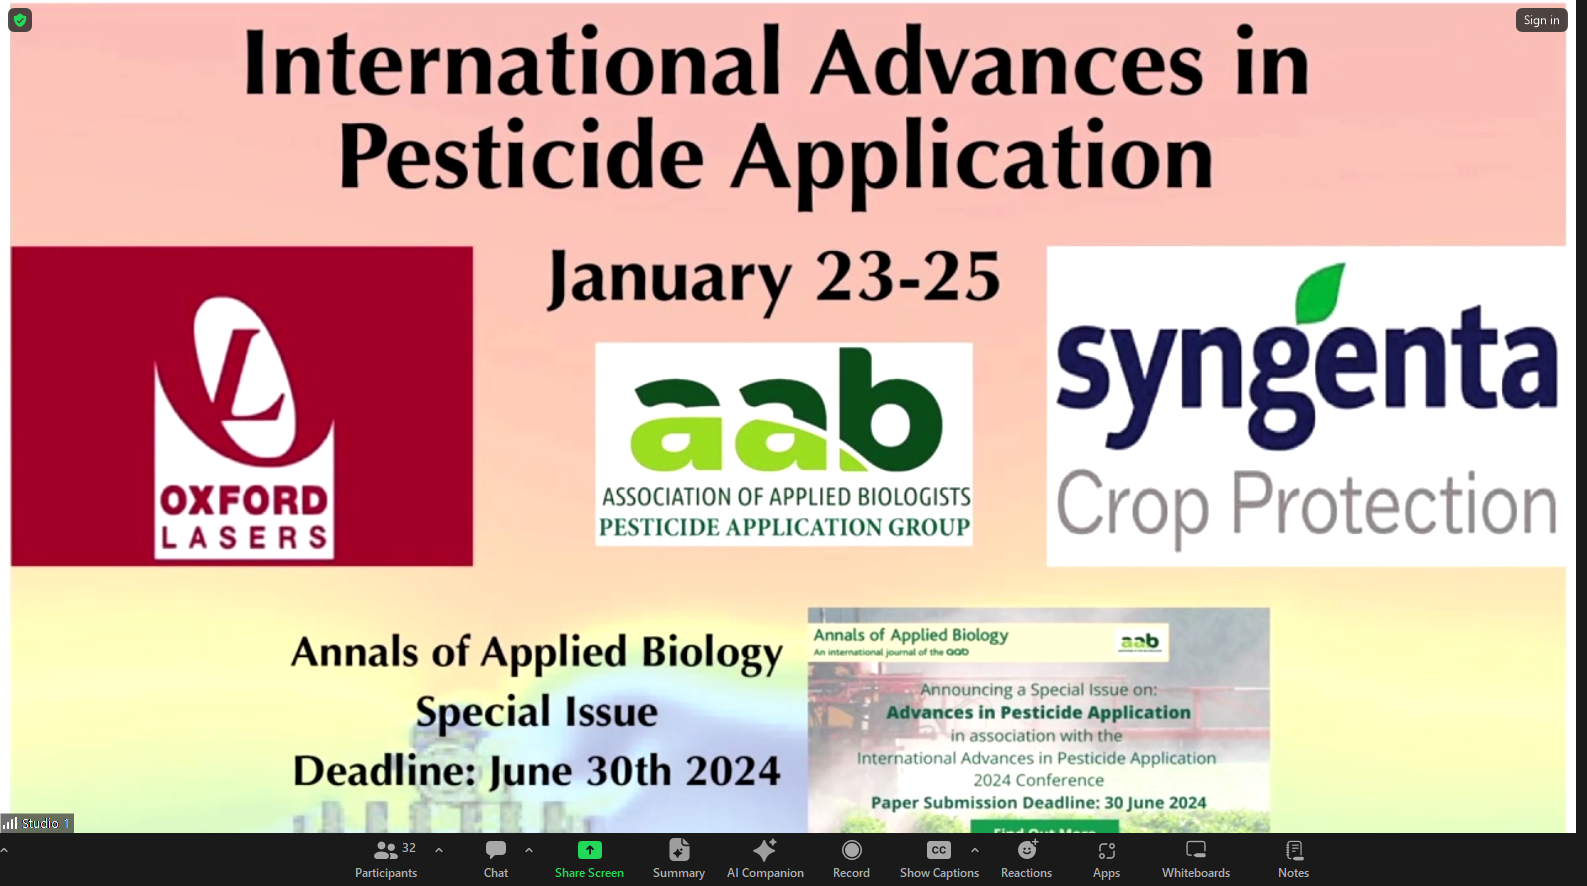 AAB Advances in Pesticide Application 2024 Conference